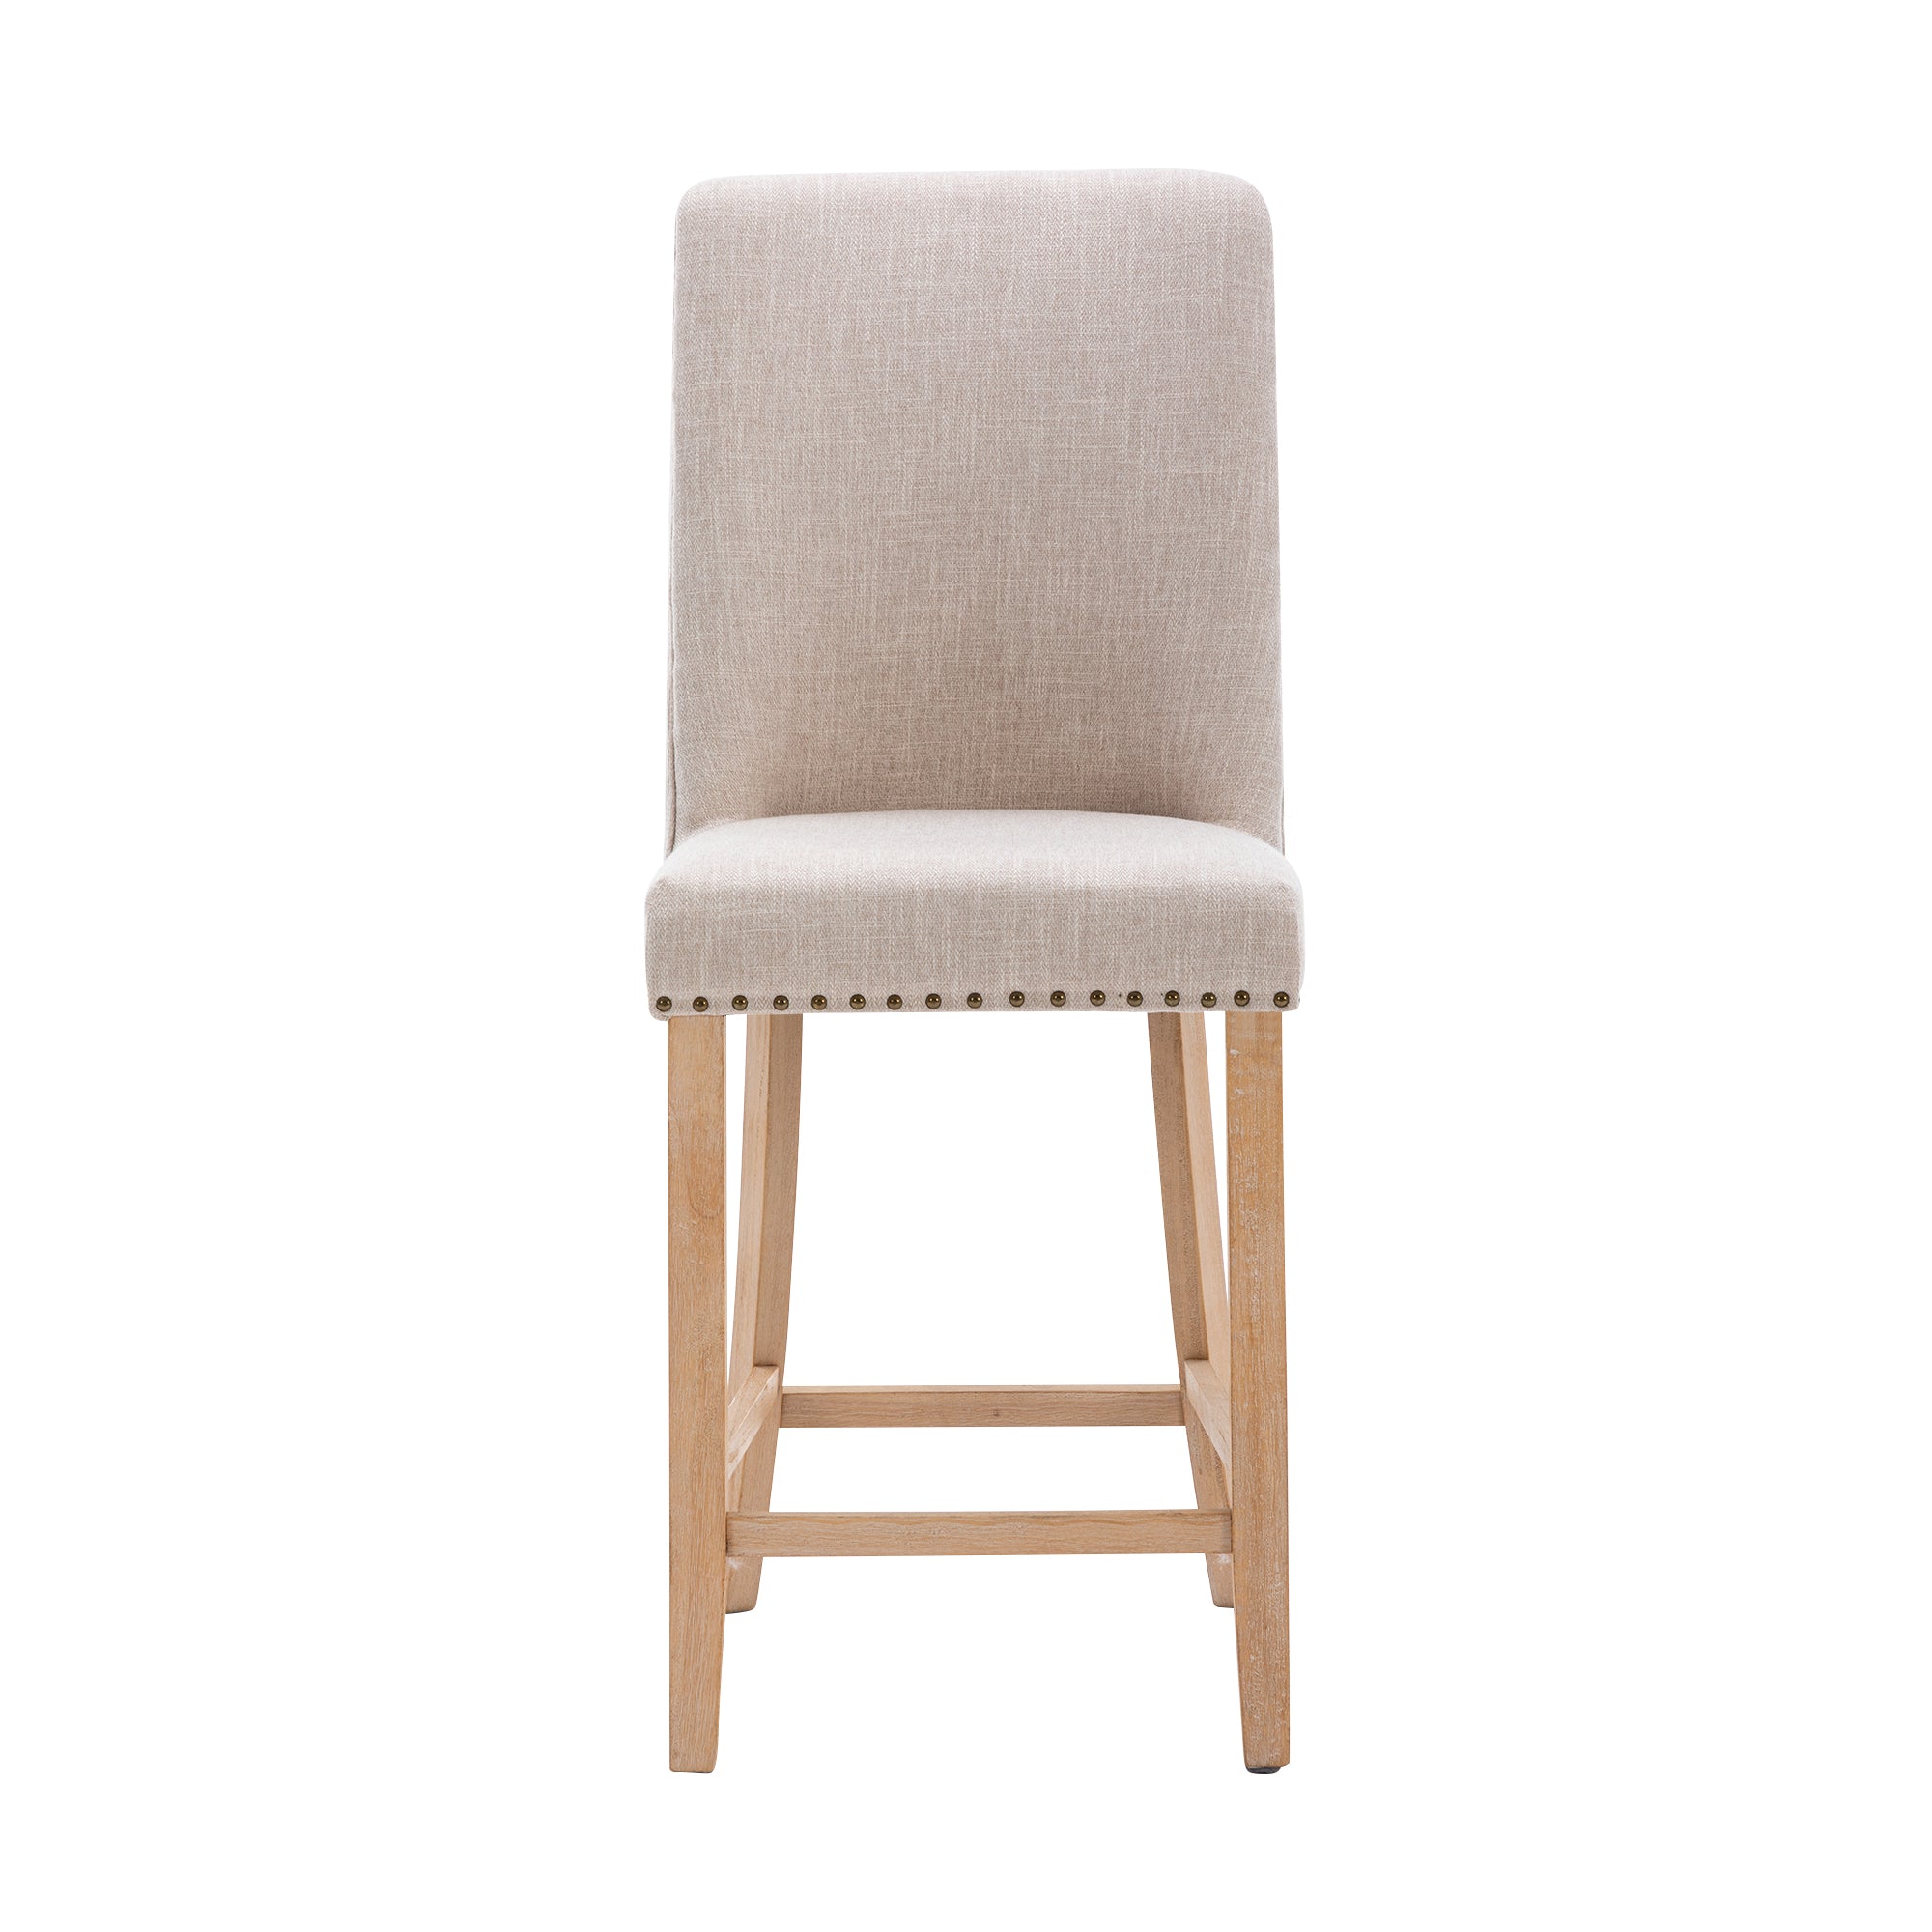 Bar Height Stools Set Upholstered Pub Chairs with Rubber Wood Legs